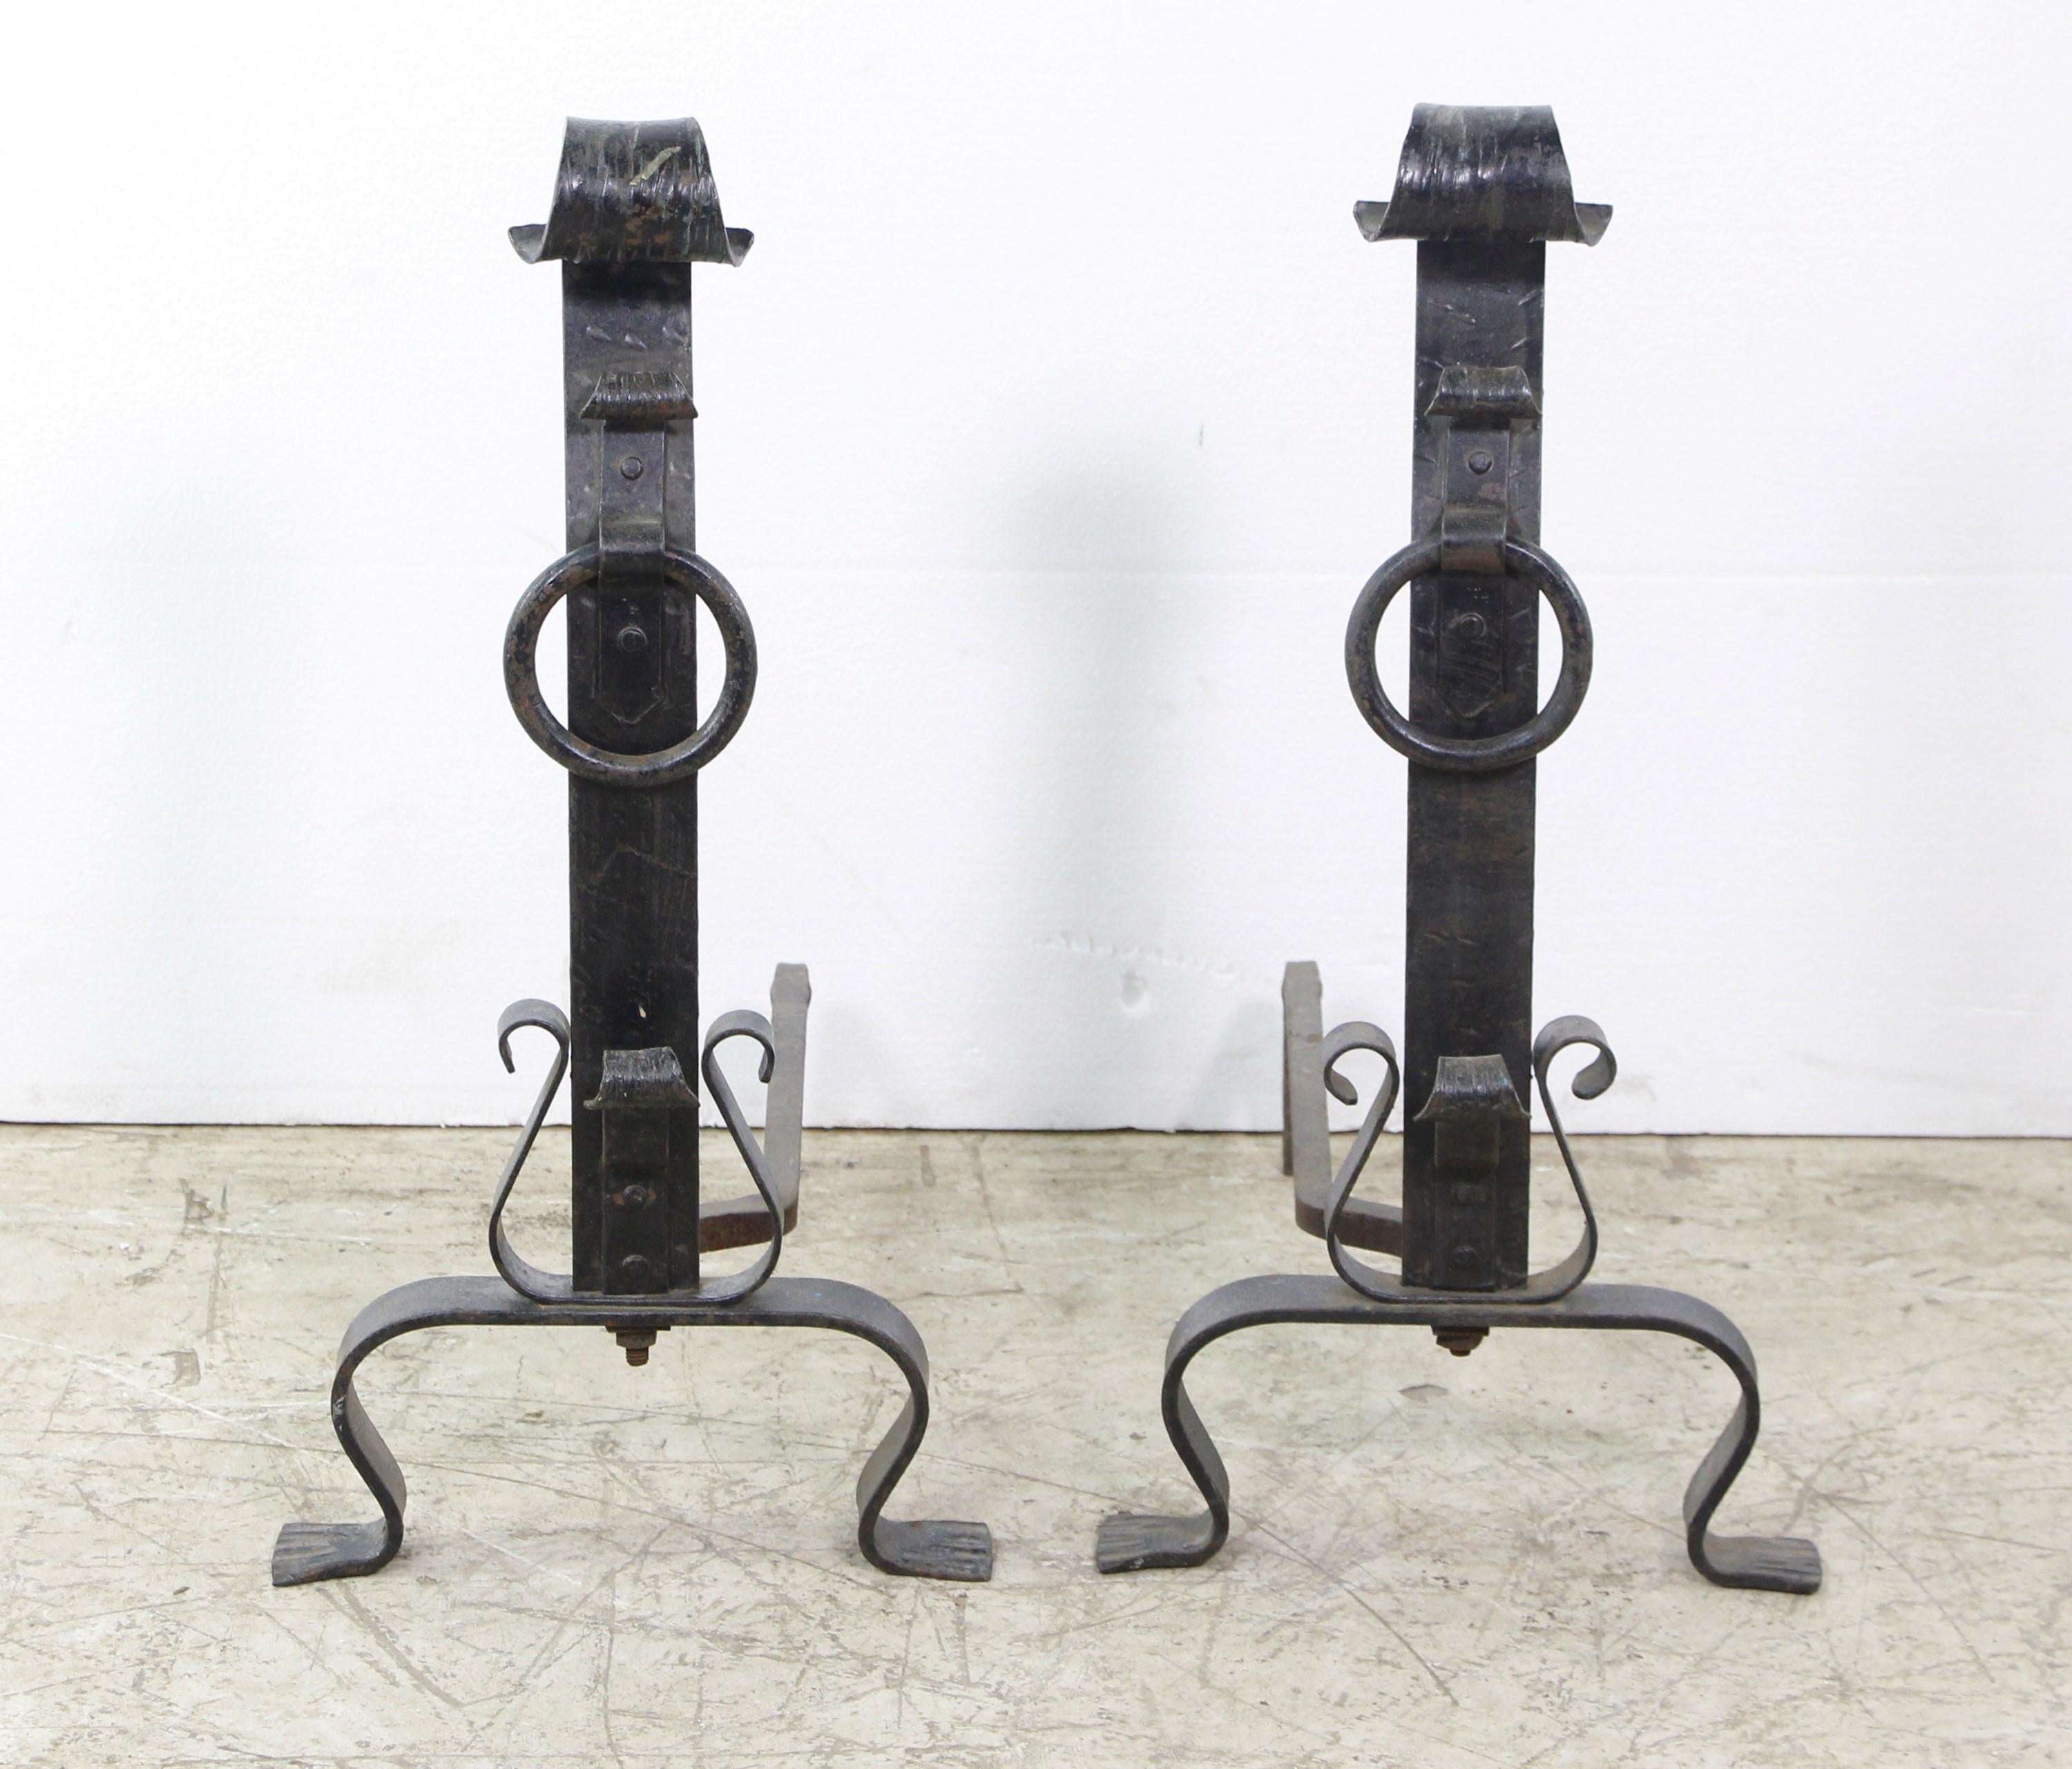 Pair of late 1890s or early 20th century hand made wrought iron andirons. Featuring a spiral design on top. Hand hammering and chiseled designs throughout.